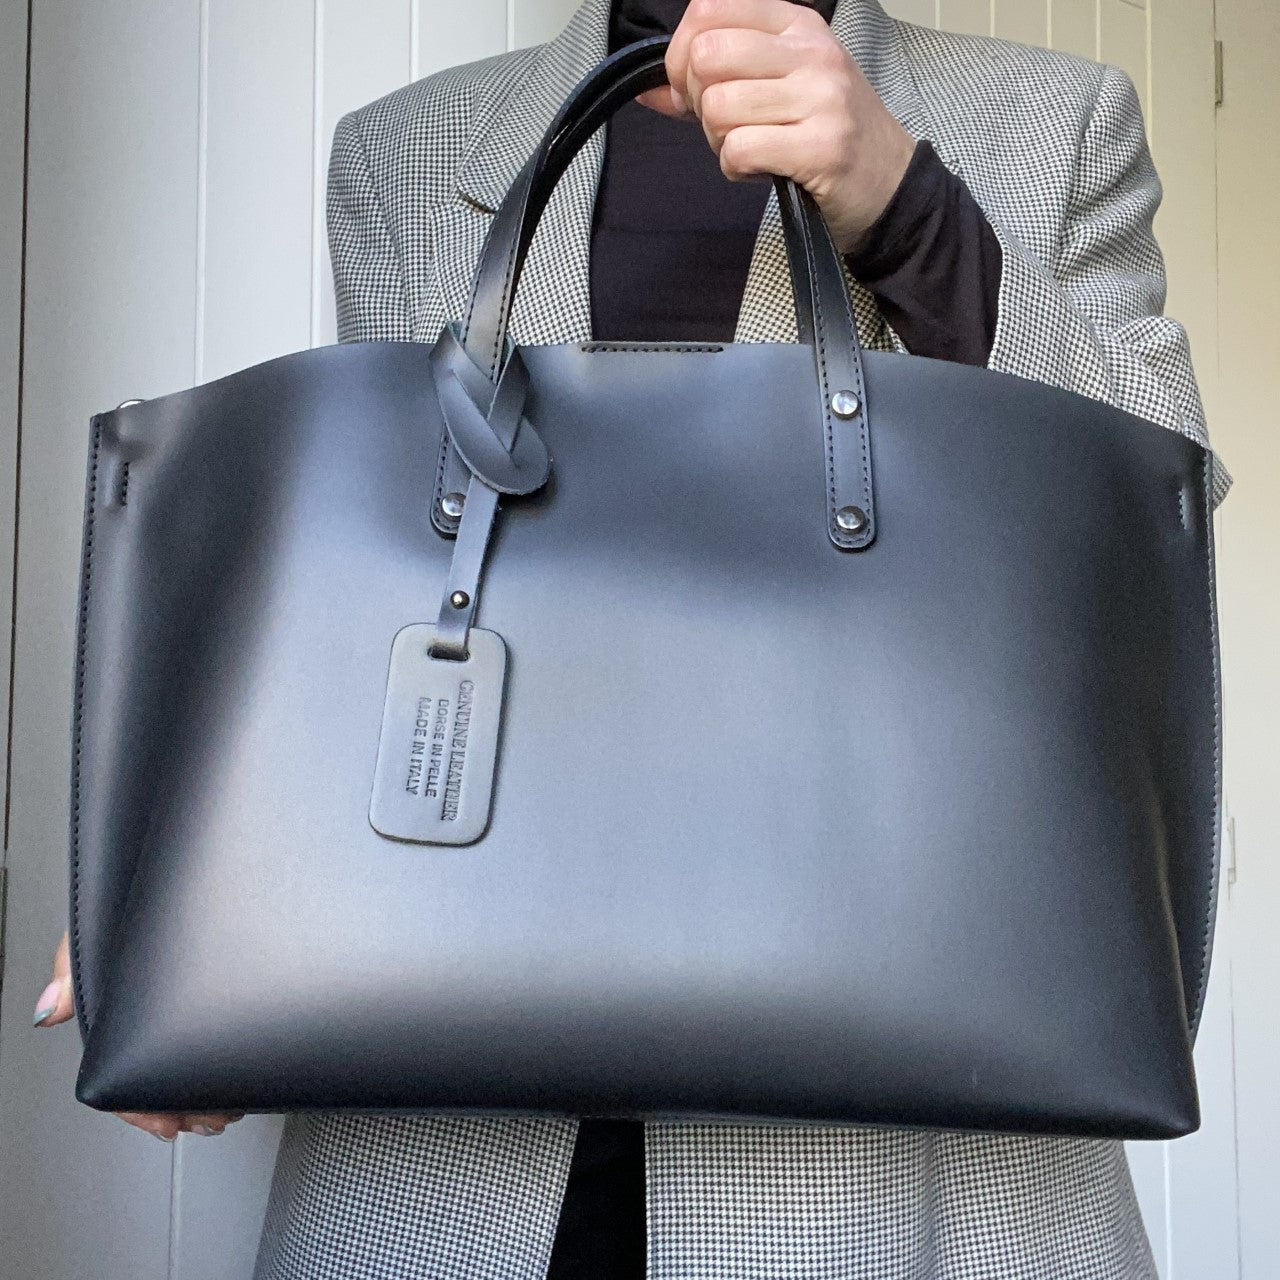 The XL Leather Work Bag